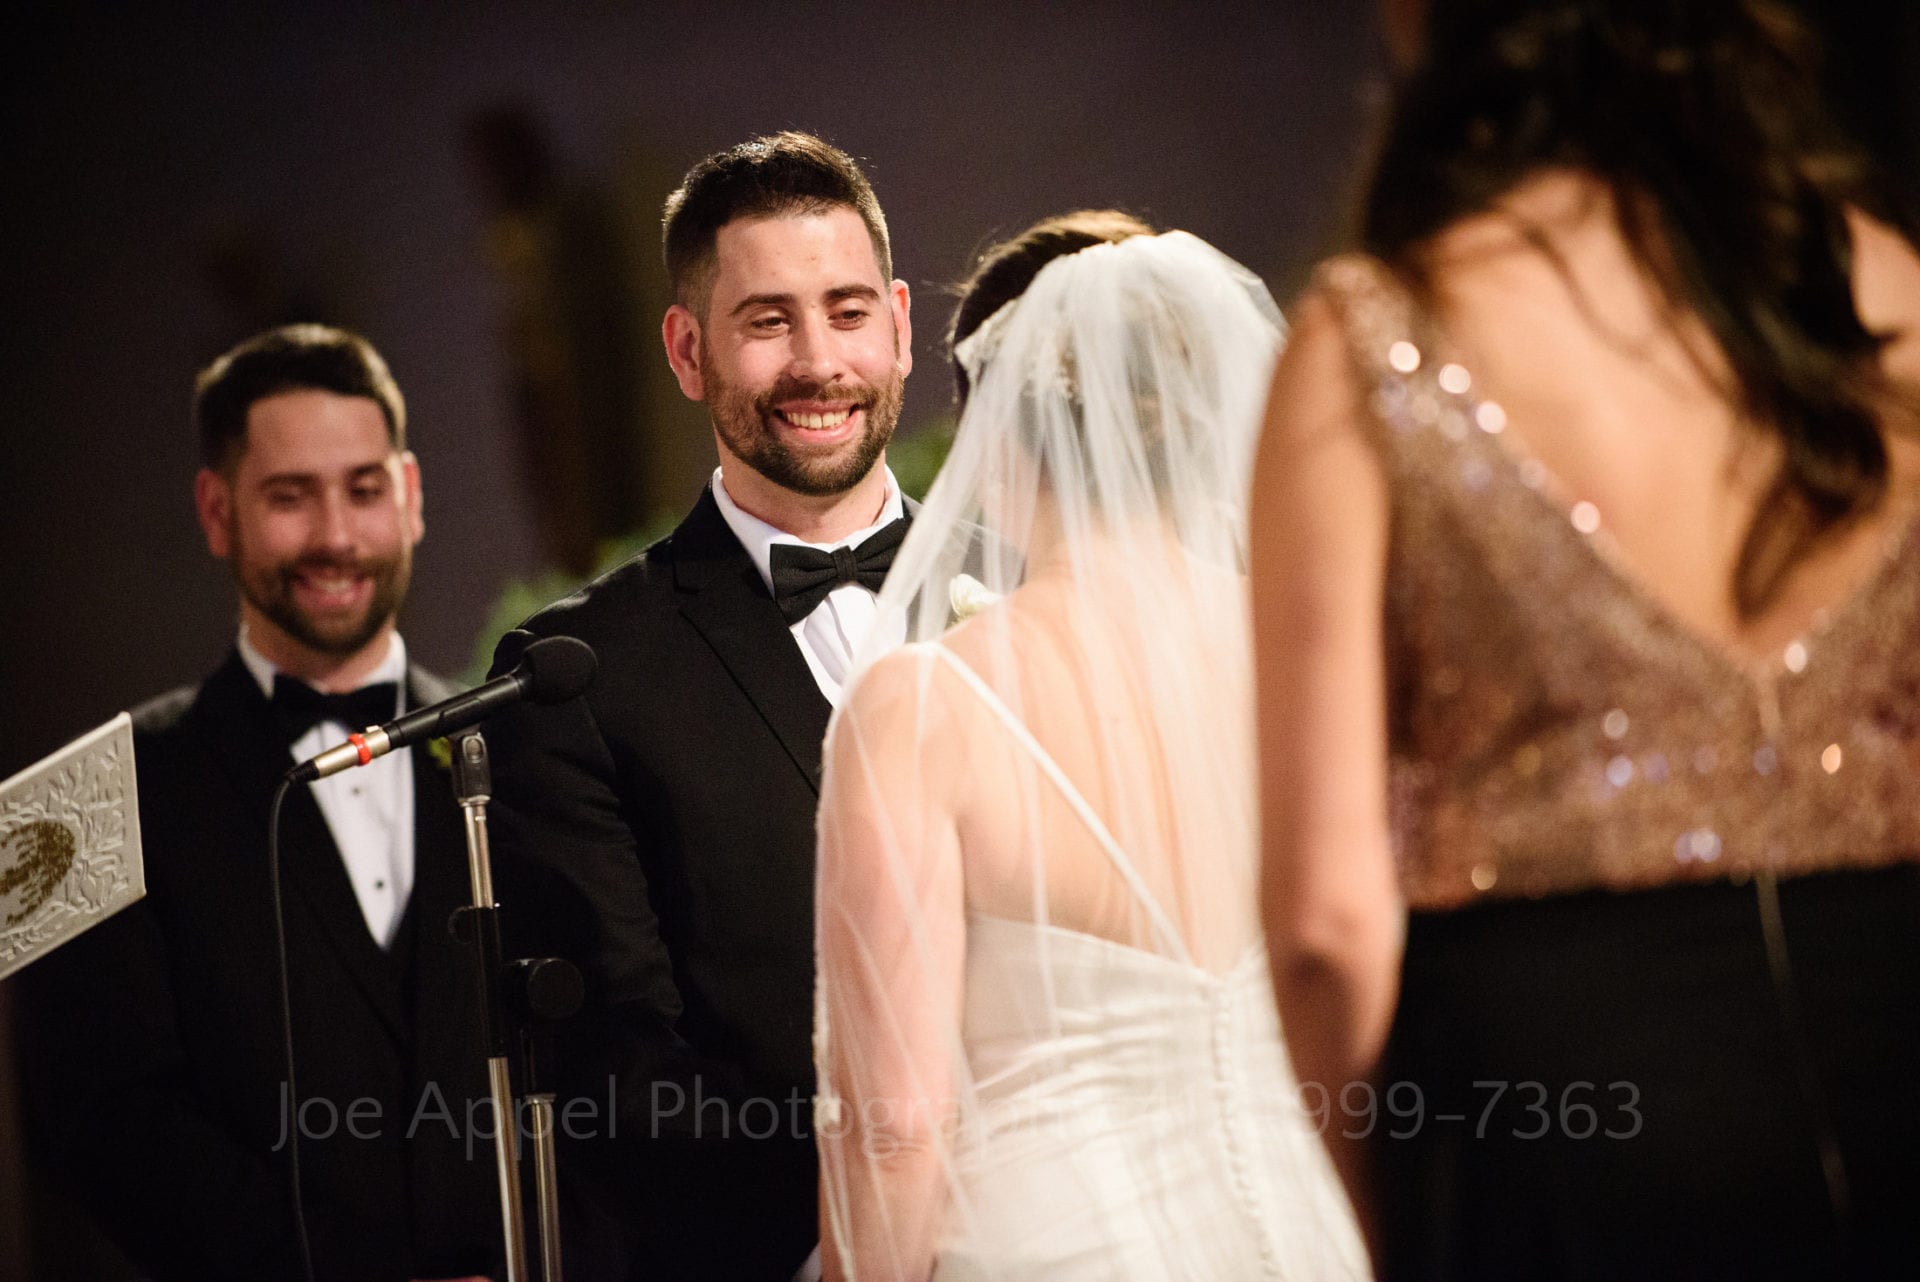 A groom smiles at his bride as they exchange vows. The groom's twin stands behind him.